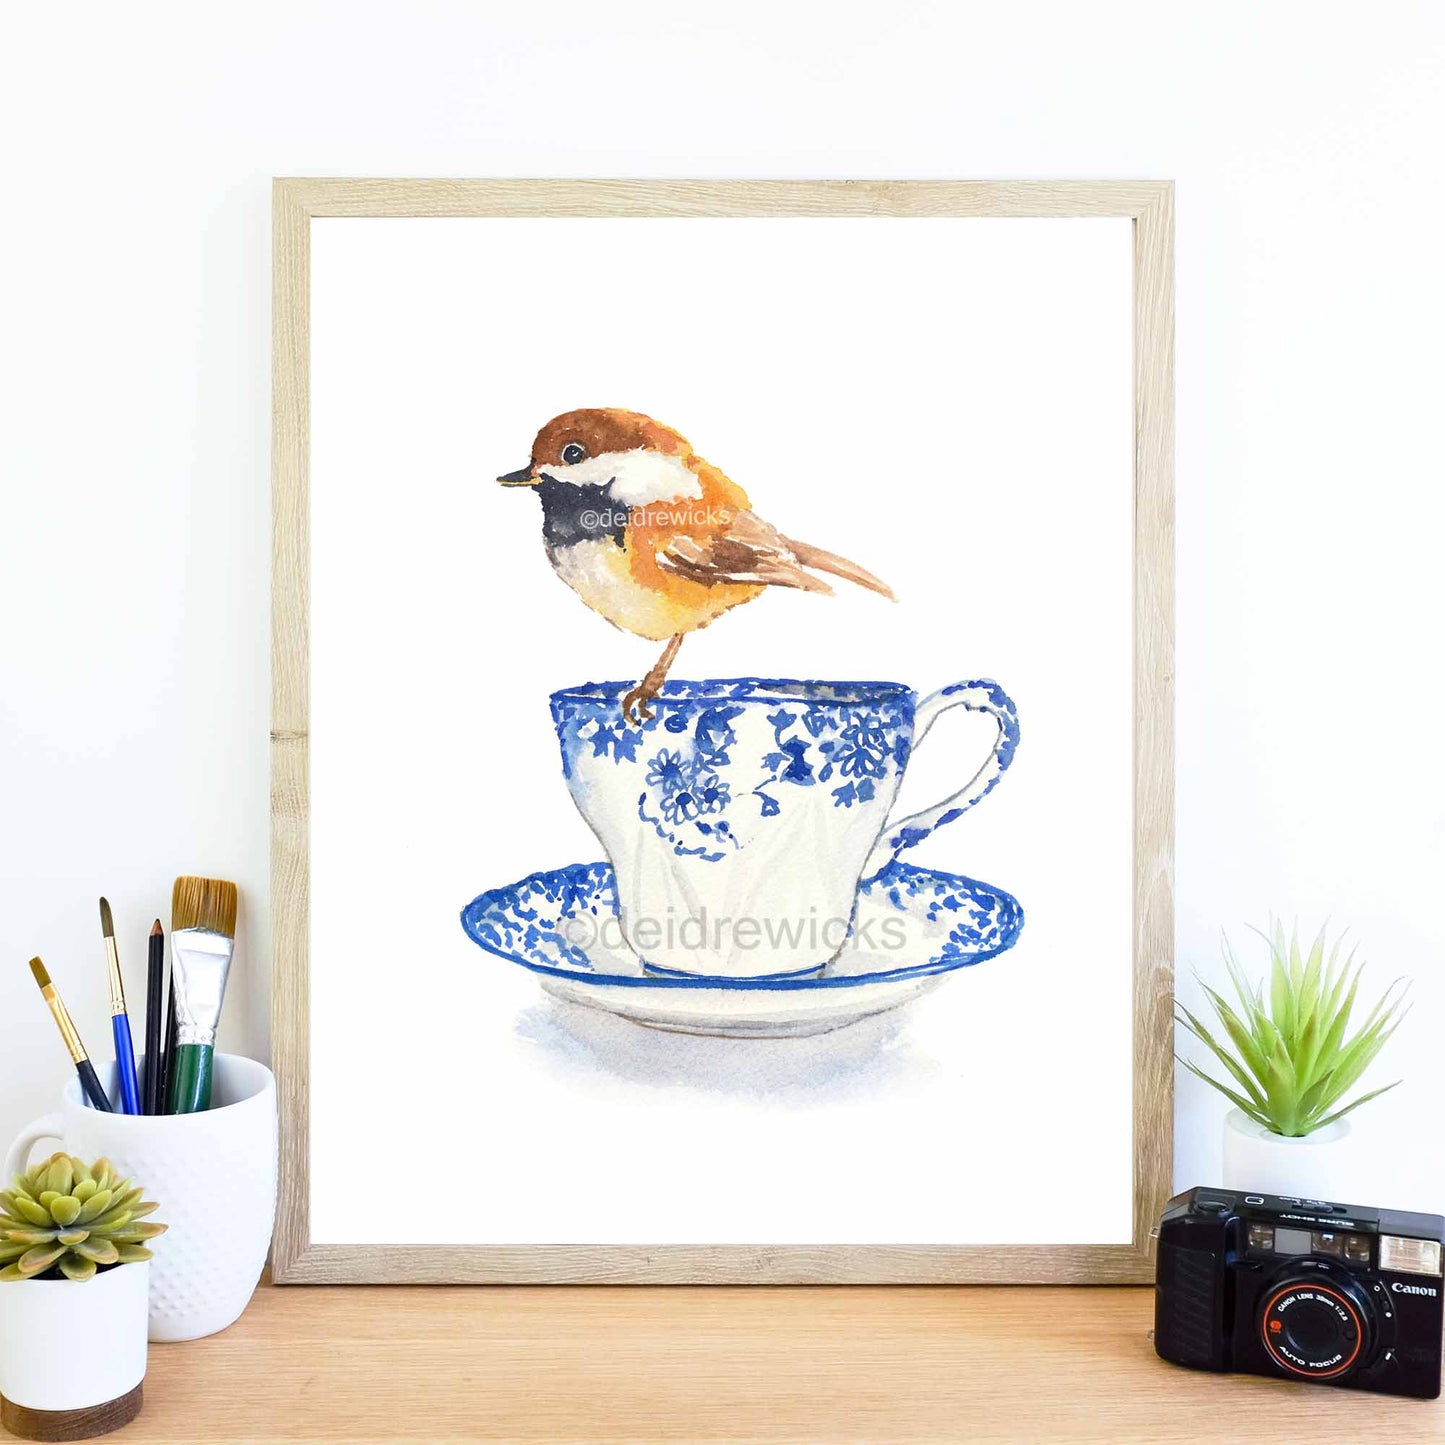 Print of a painting of a chickadee bird on a tea cup by Water In My Paint